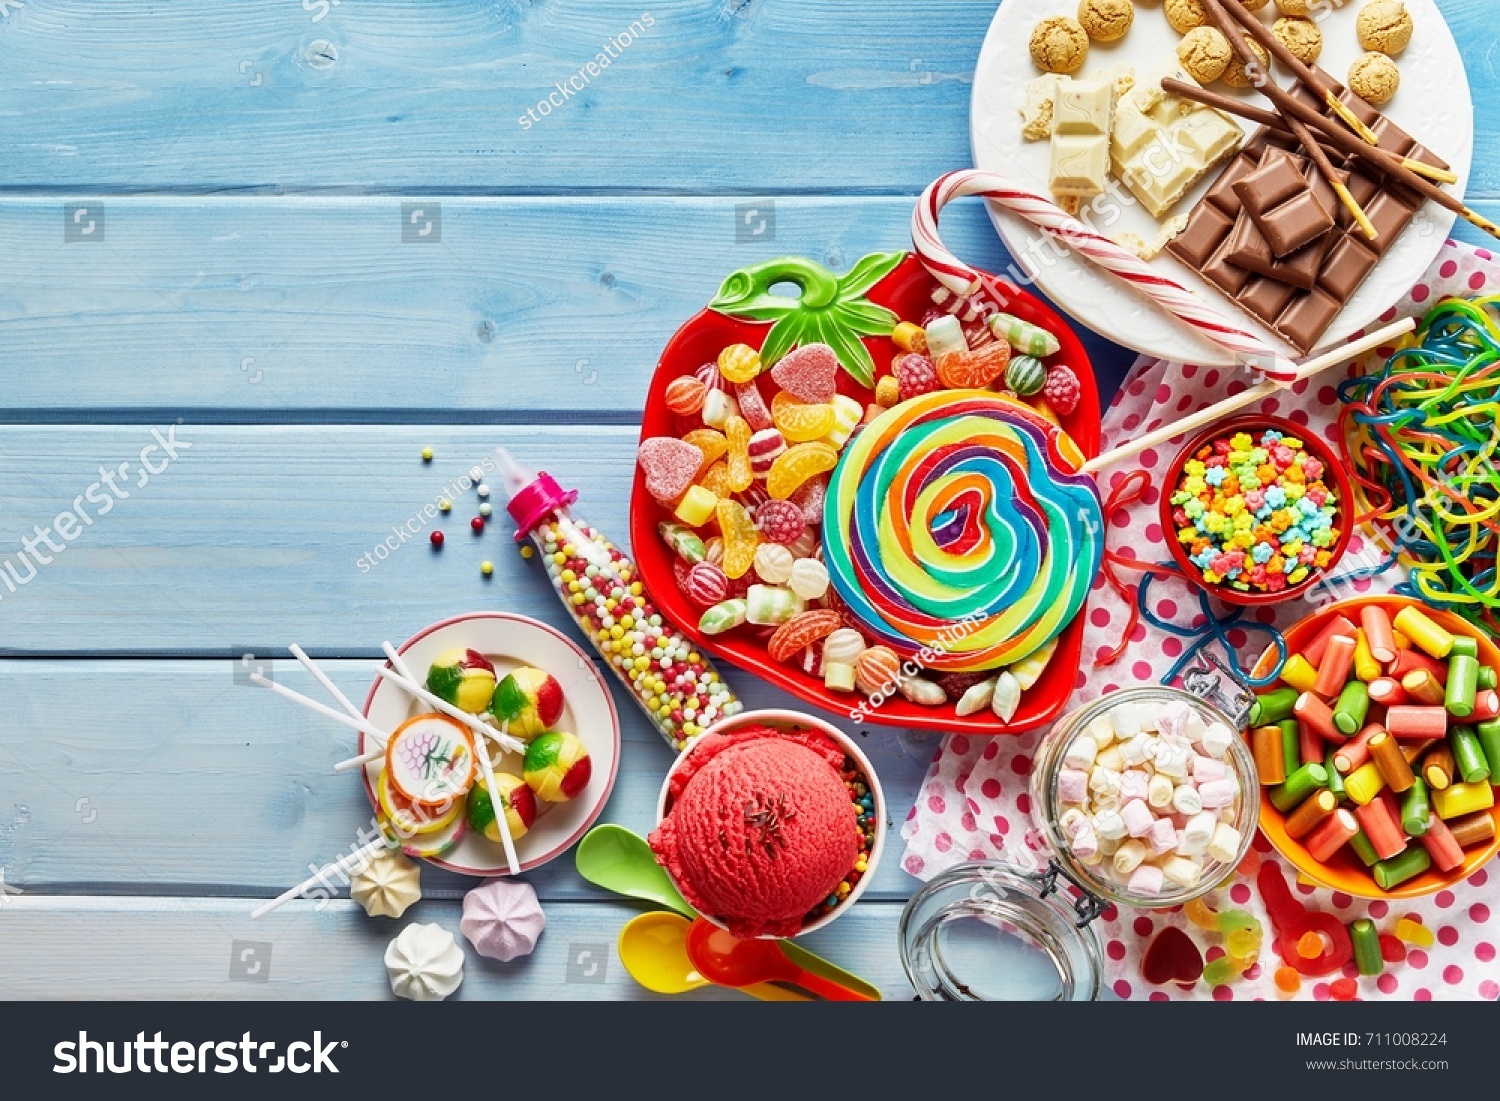 Overhead view of colorful array of different childs sweets and treats in bowls on light blue wood background #711008224